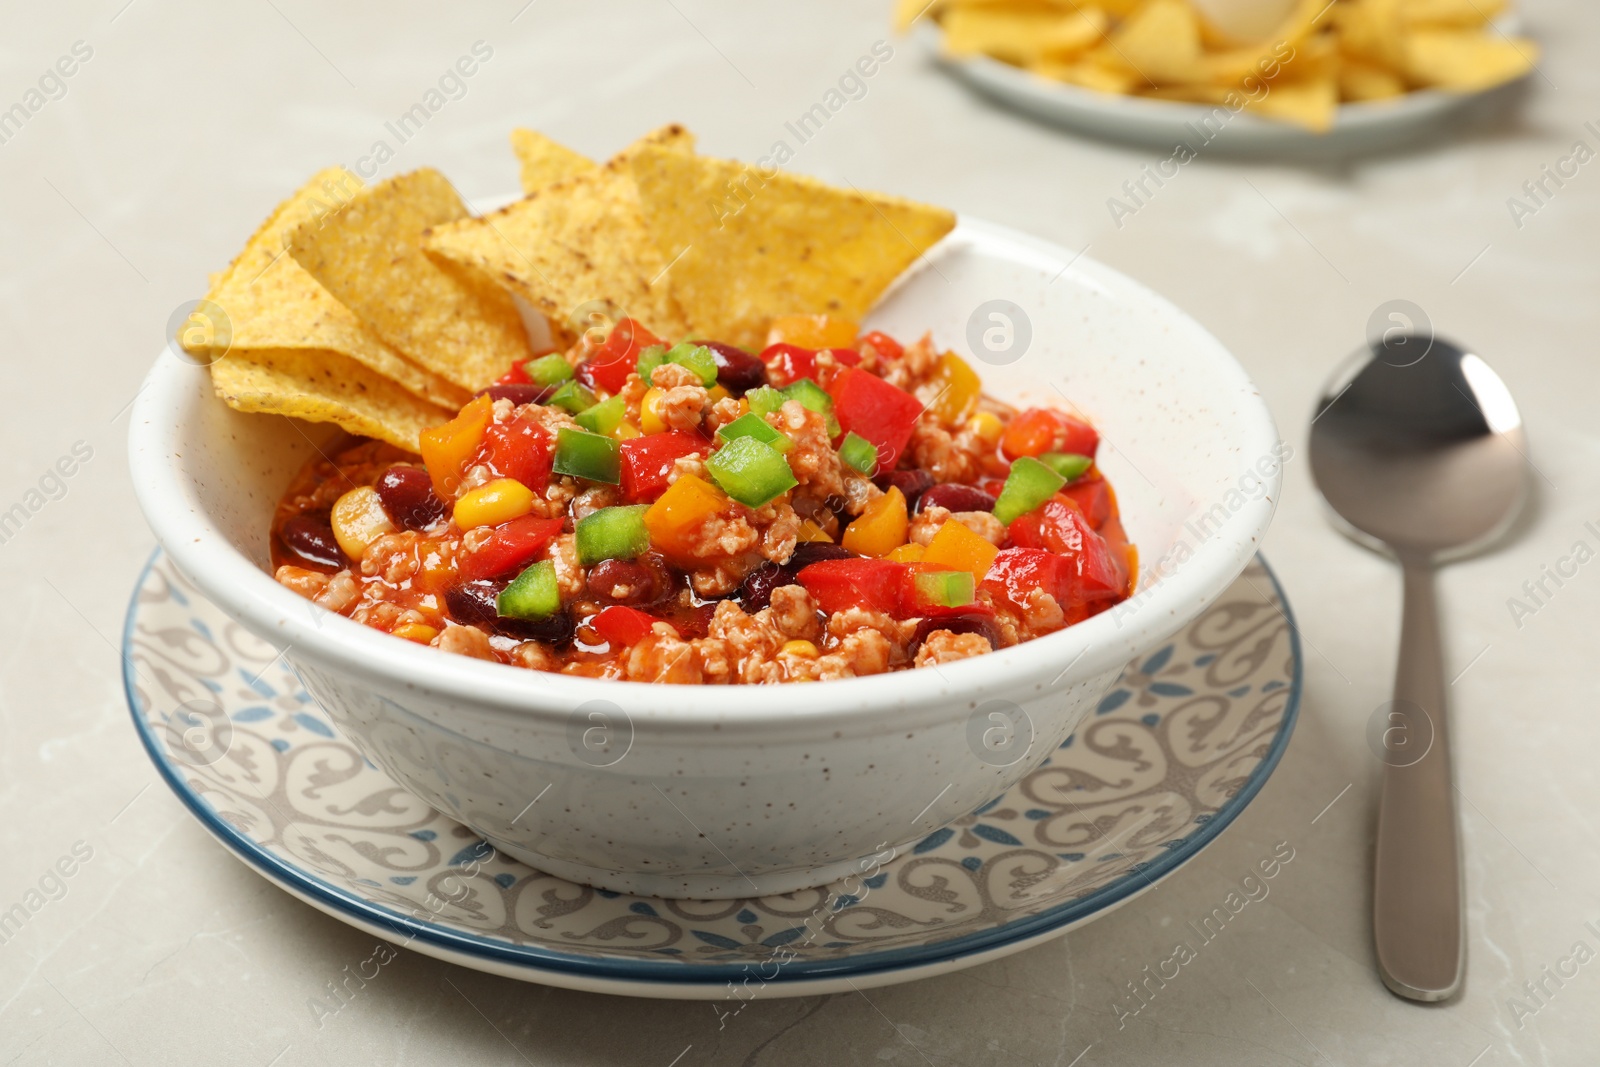 Photo of Chili con carne served with tortilla chips in bowl on table